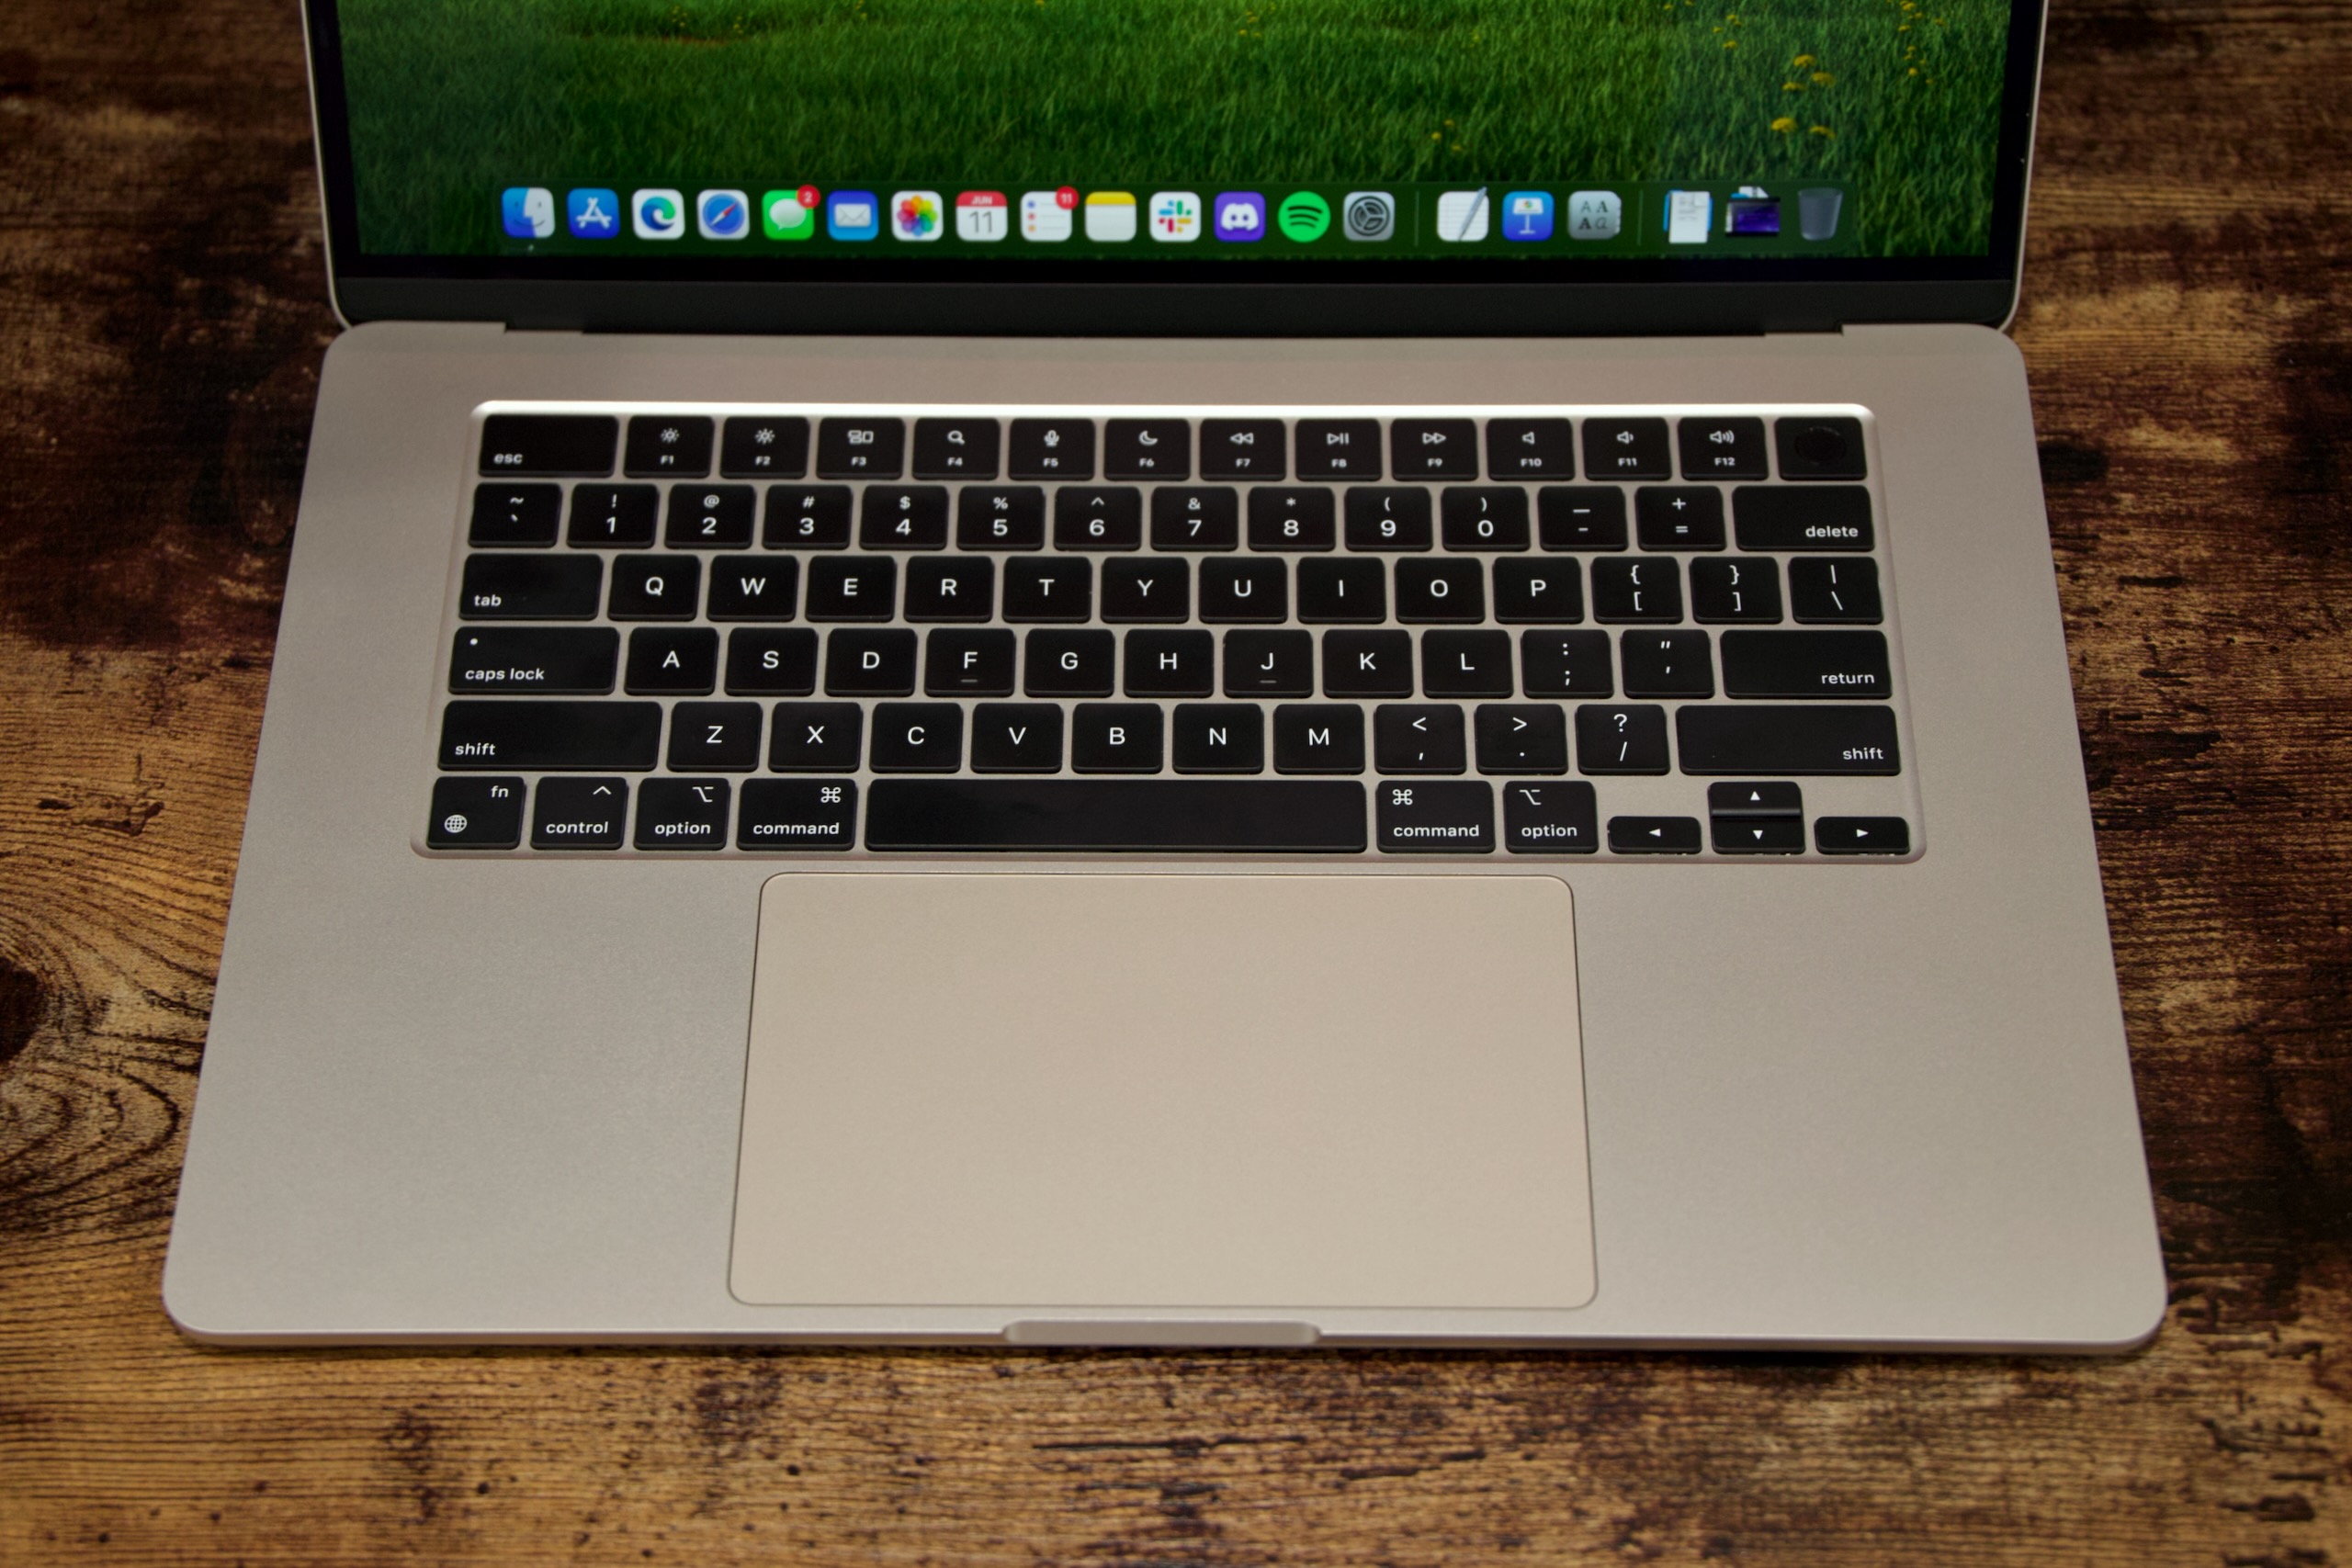 The 15-inch Air's keyboard is the same as the one in the 13-inch Air, with more padding on either side.